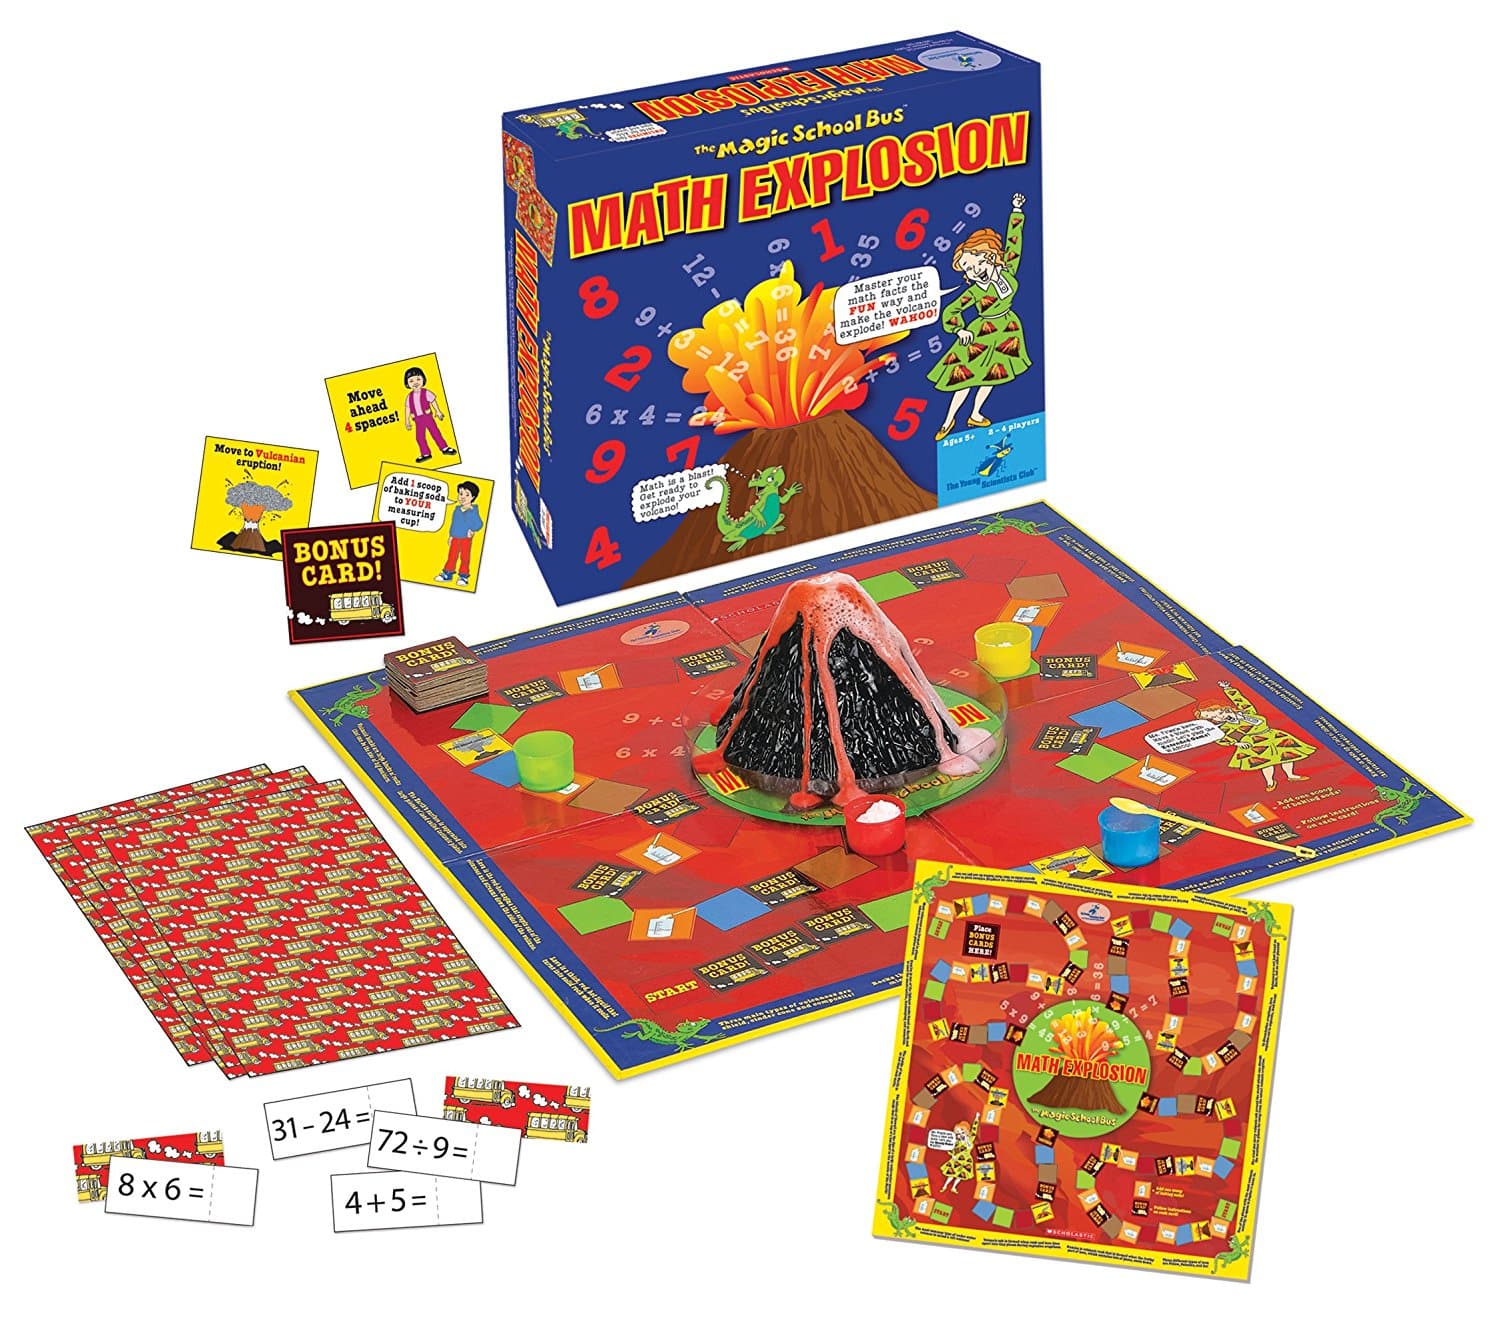 DEAL ALERT: Math meets Ms Frizzle! Math Explosion Game is 25% off!